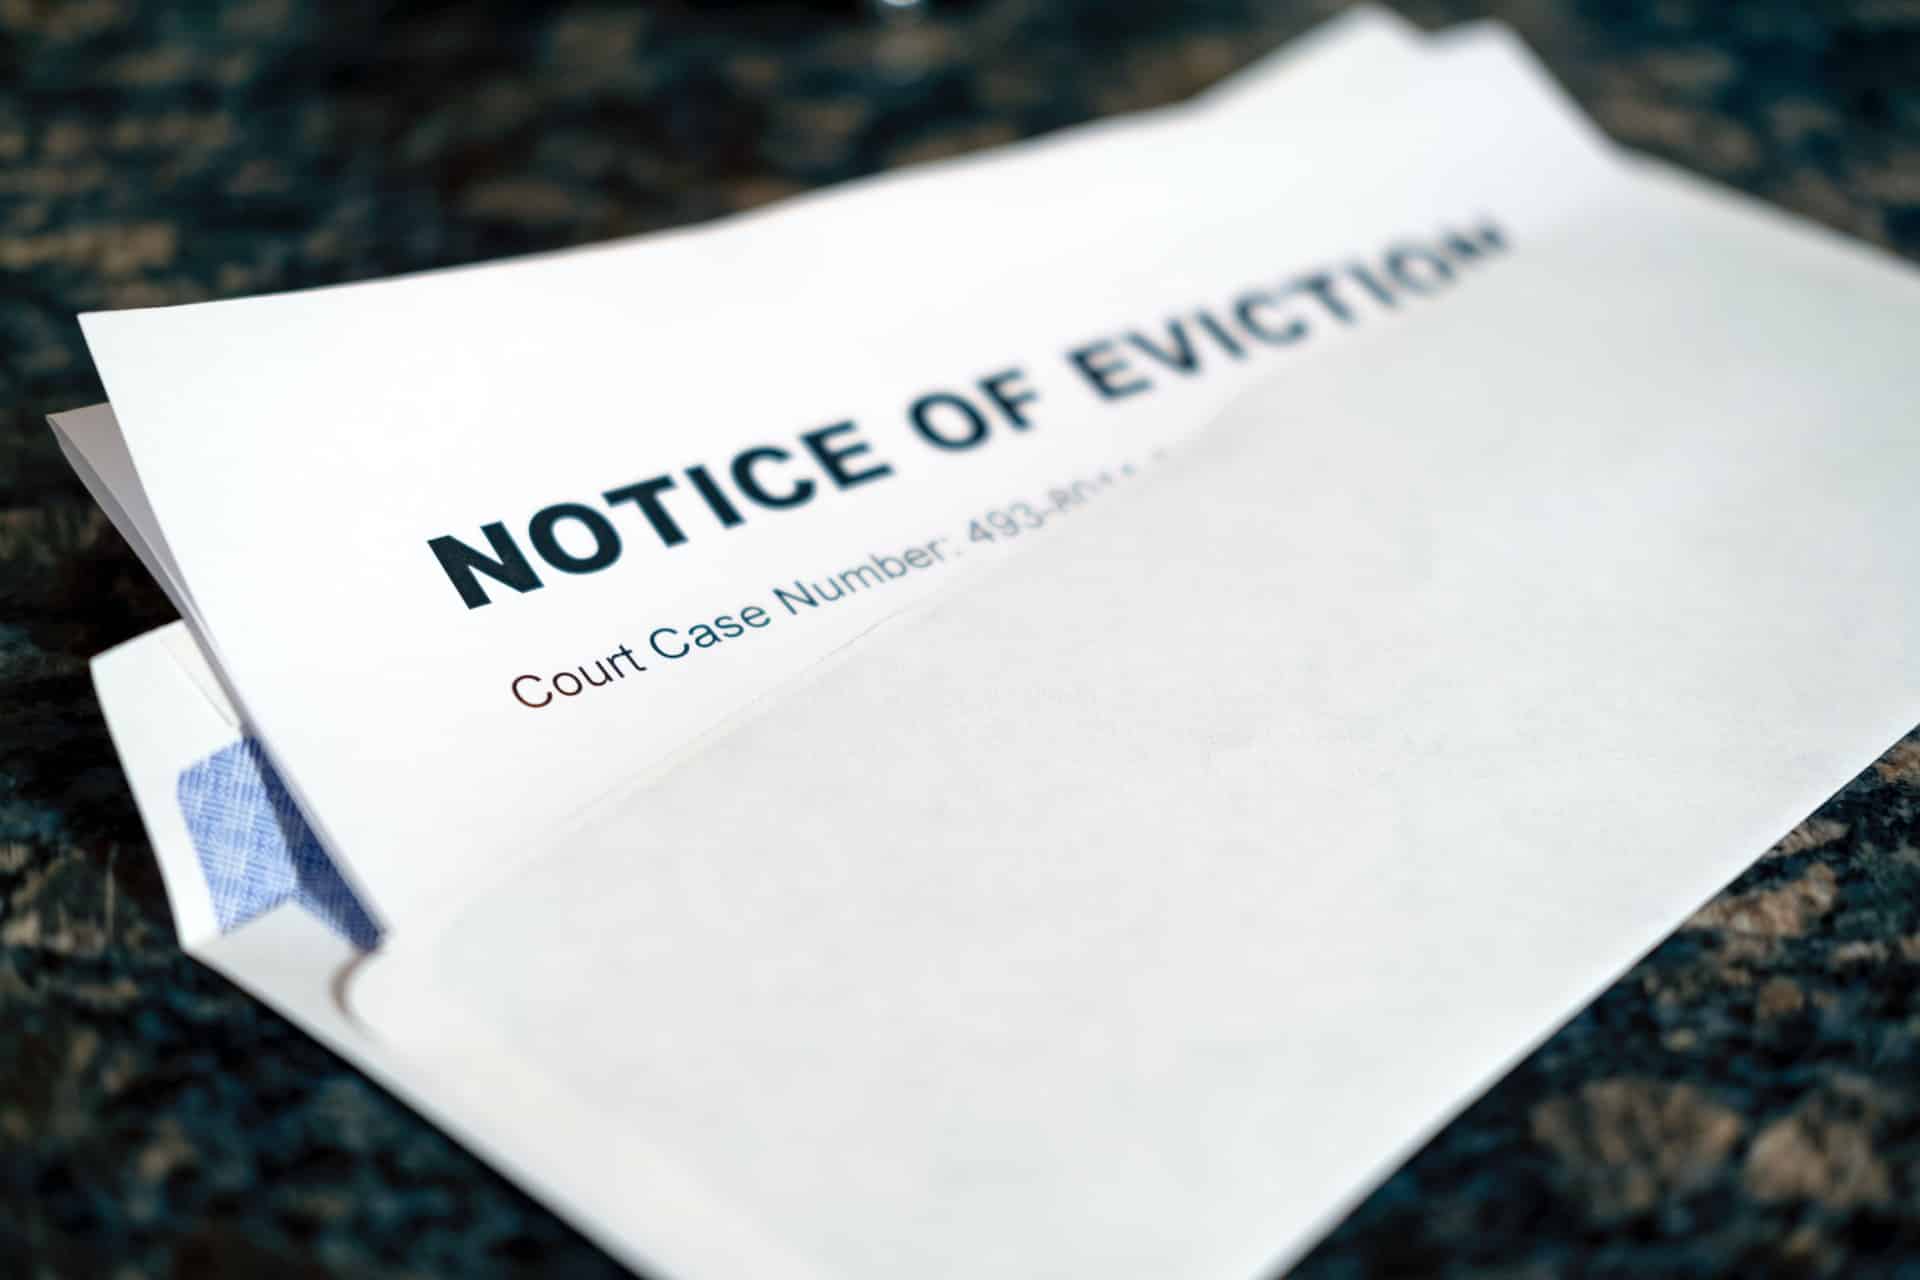 Photo of notice of eviction is shown to illustrate eviction prevention strategies